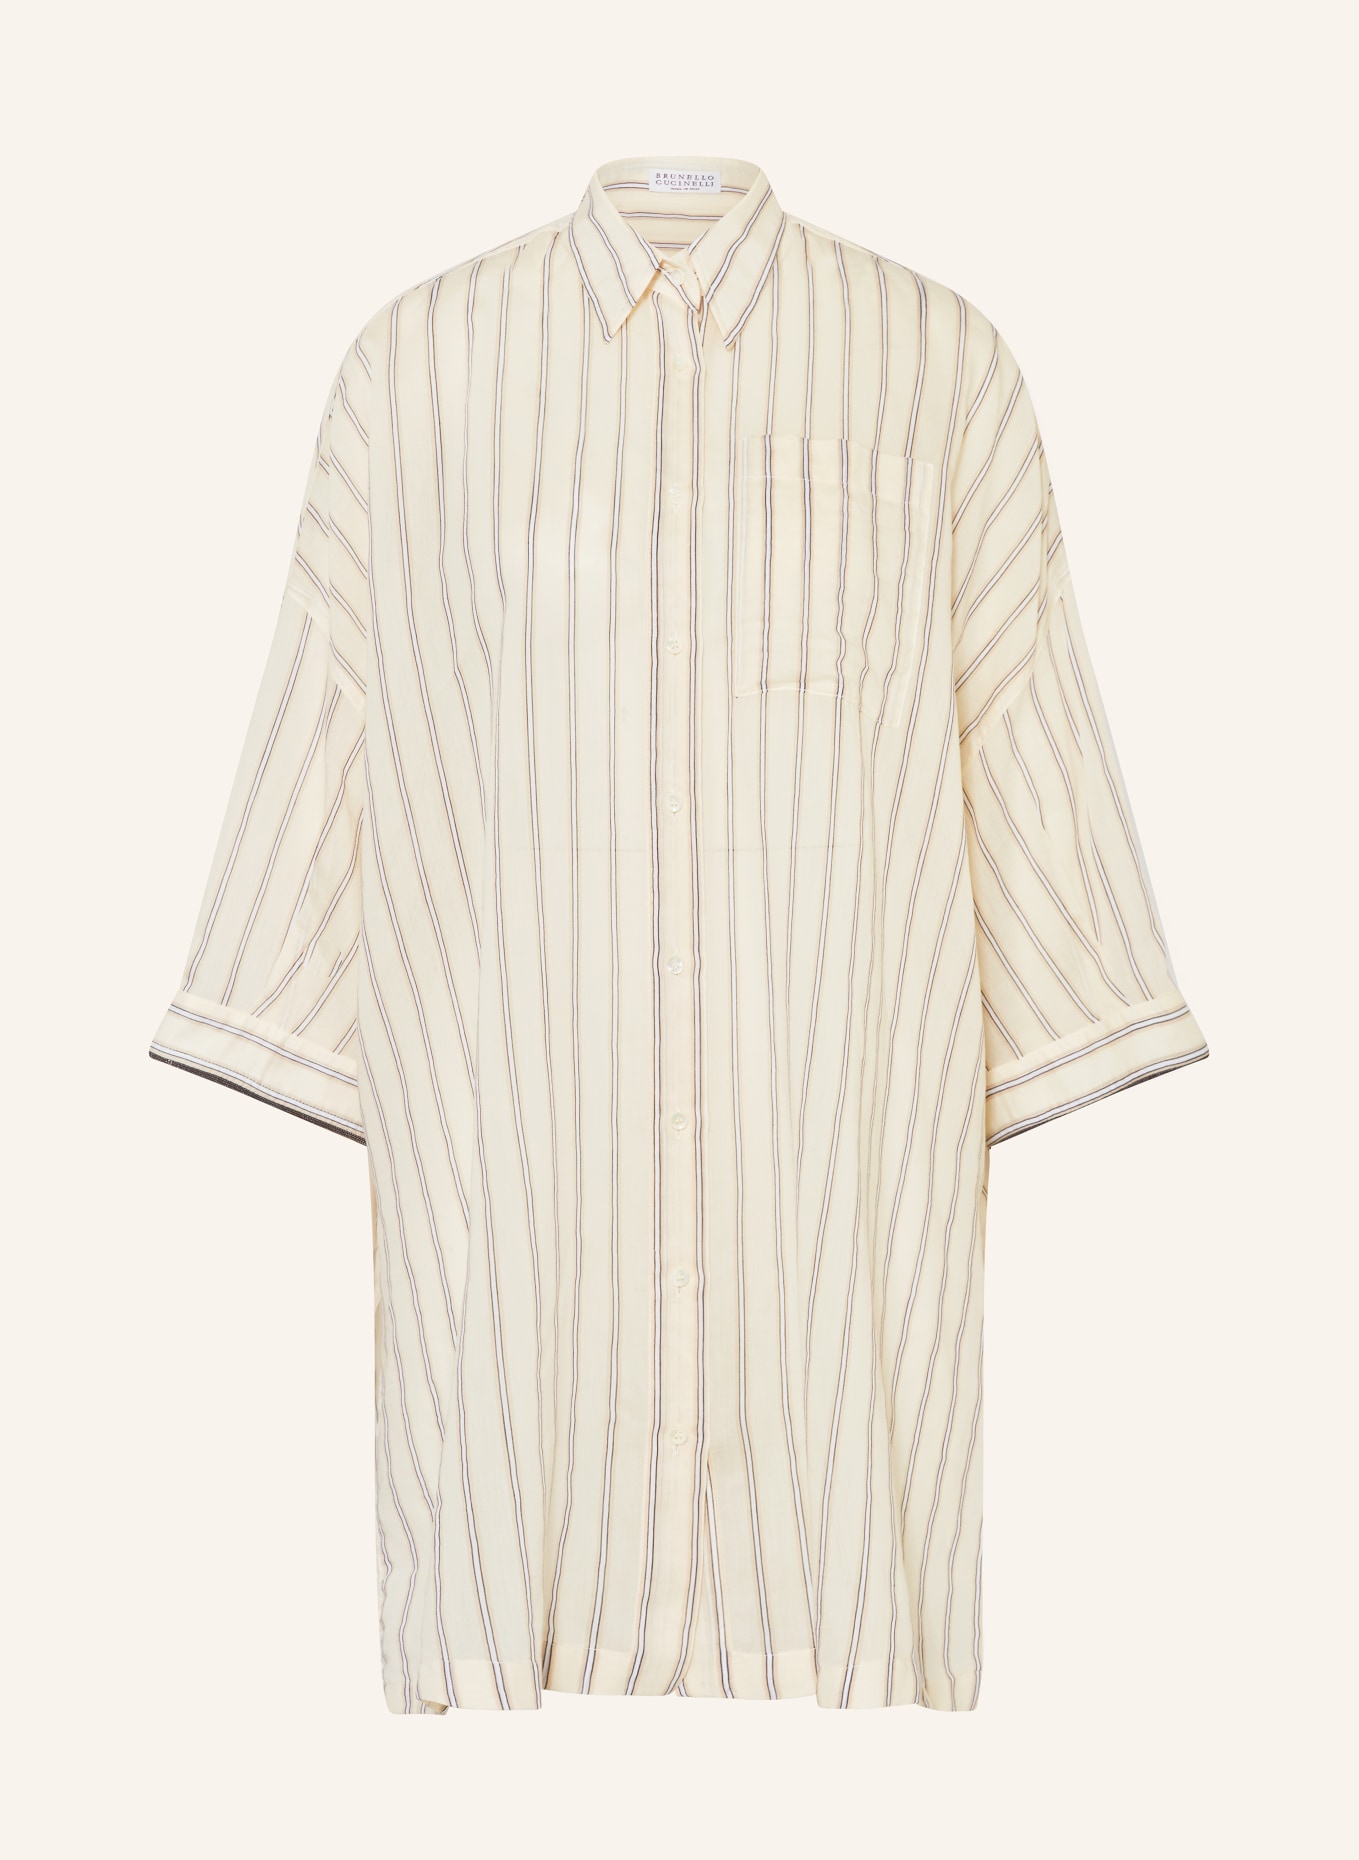 BRUNELLO CUCINELLI Oversized shirt blouse with 3/4 sleeves, Color: LIGHT YELLOW/ BEIGE/ BLACK (Image 1)